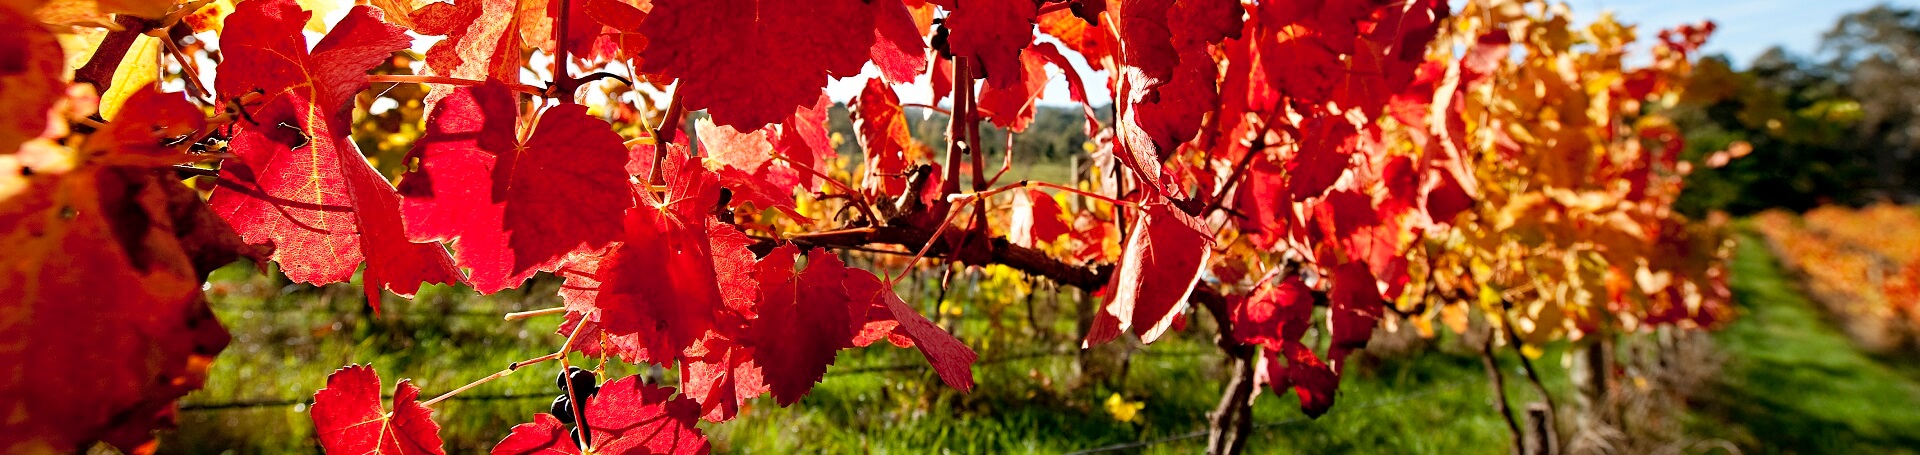 What time of year is best for wine tours?